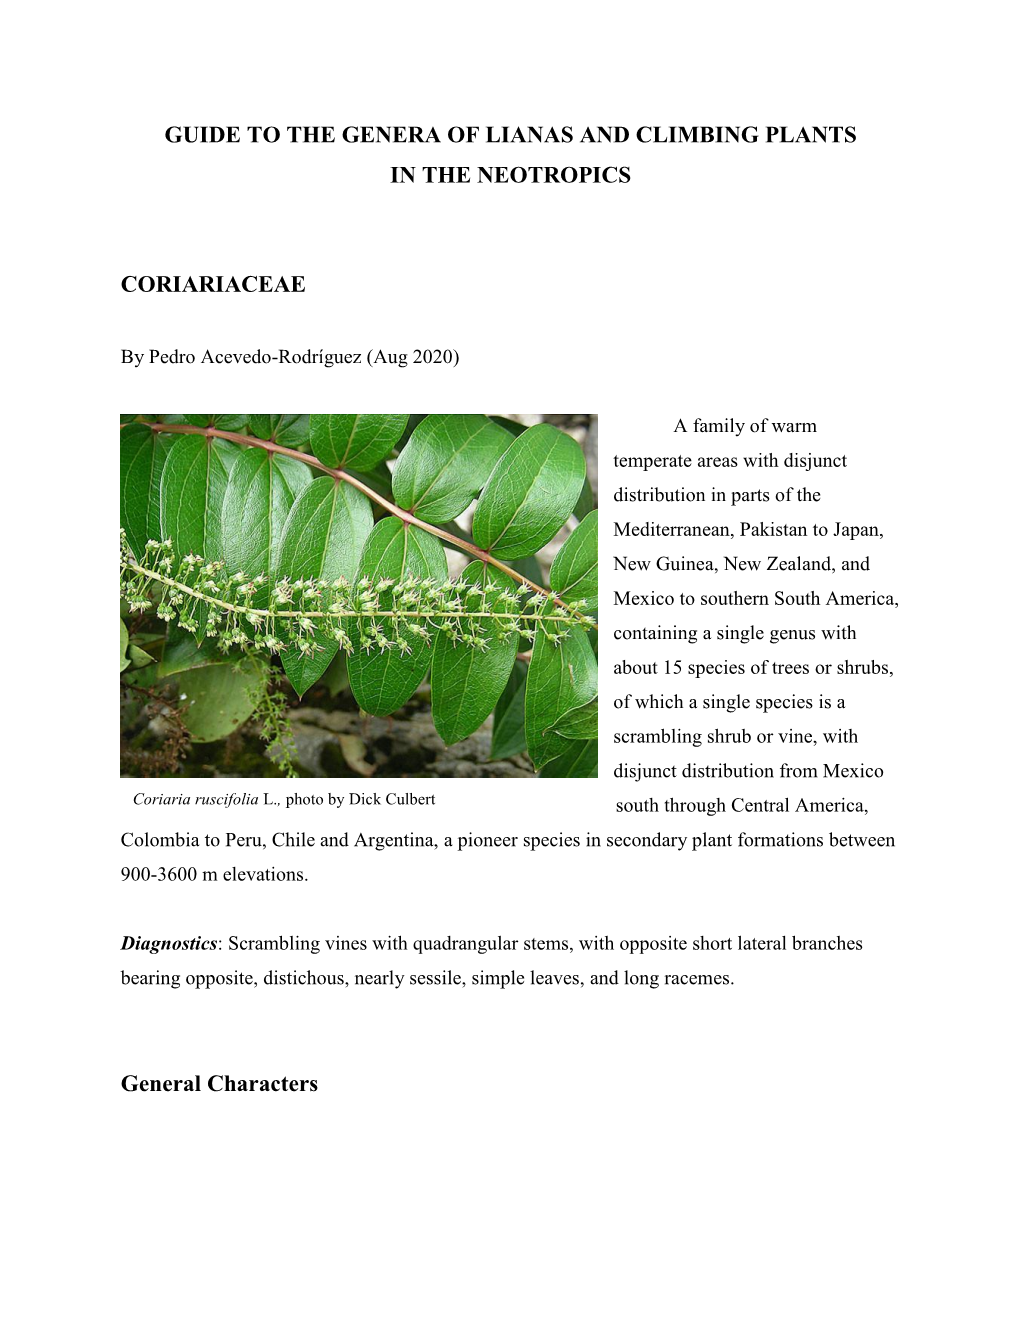 Lianas and Climbing Plants of the Neotropics: Coriariaceae